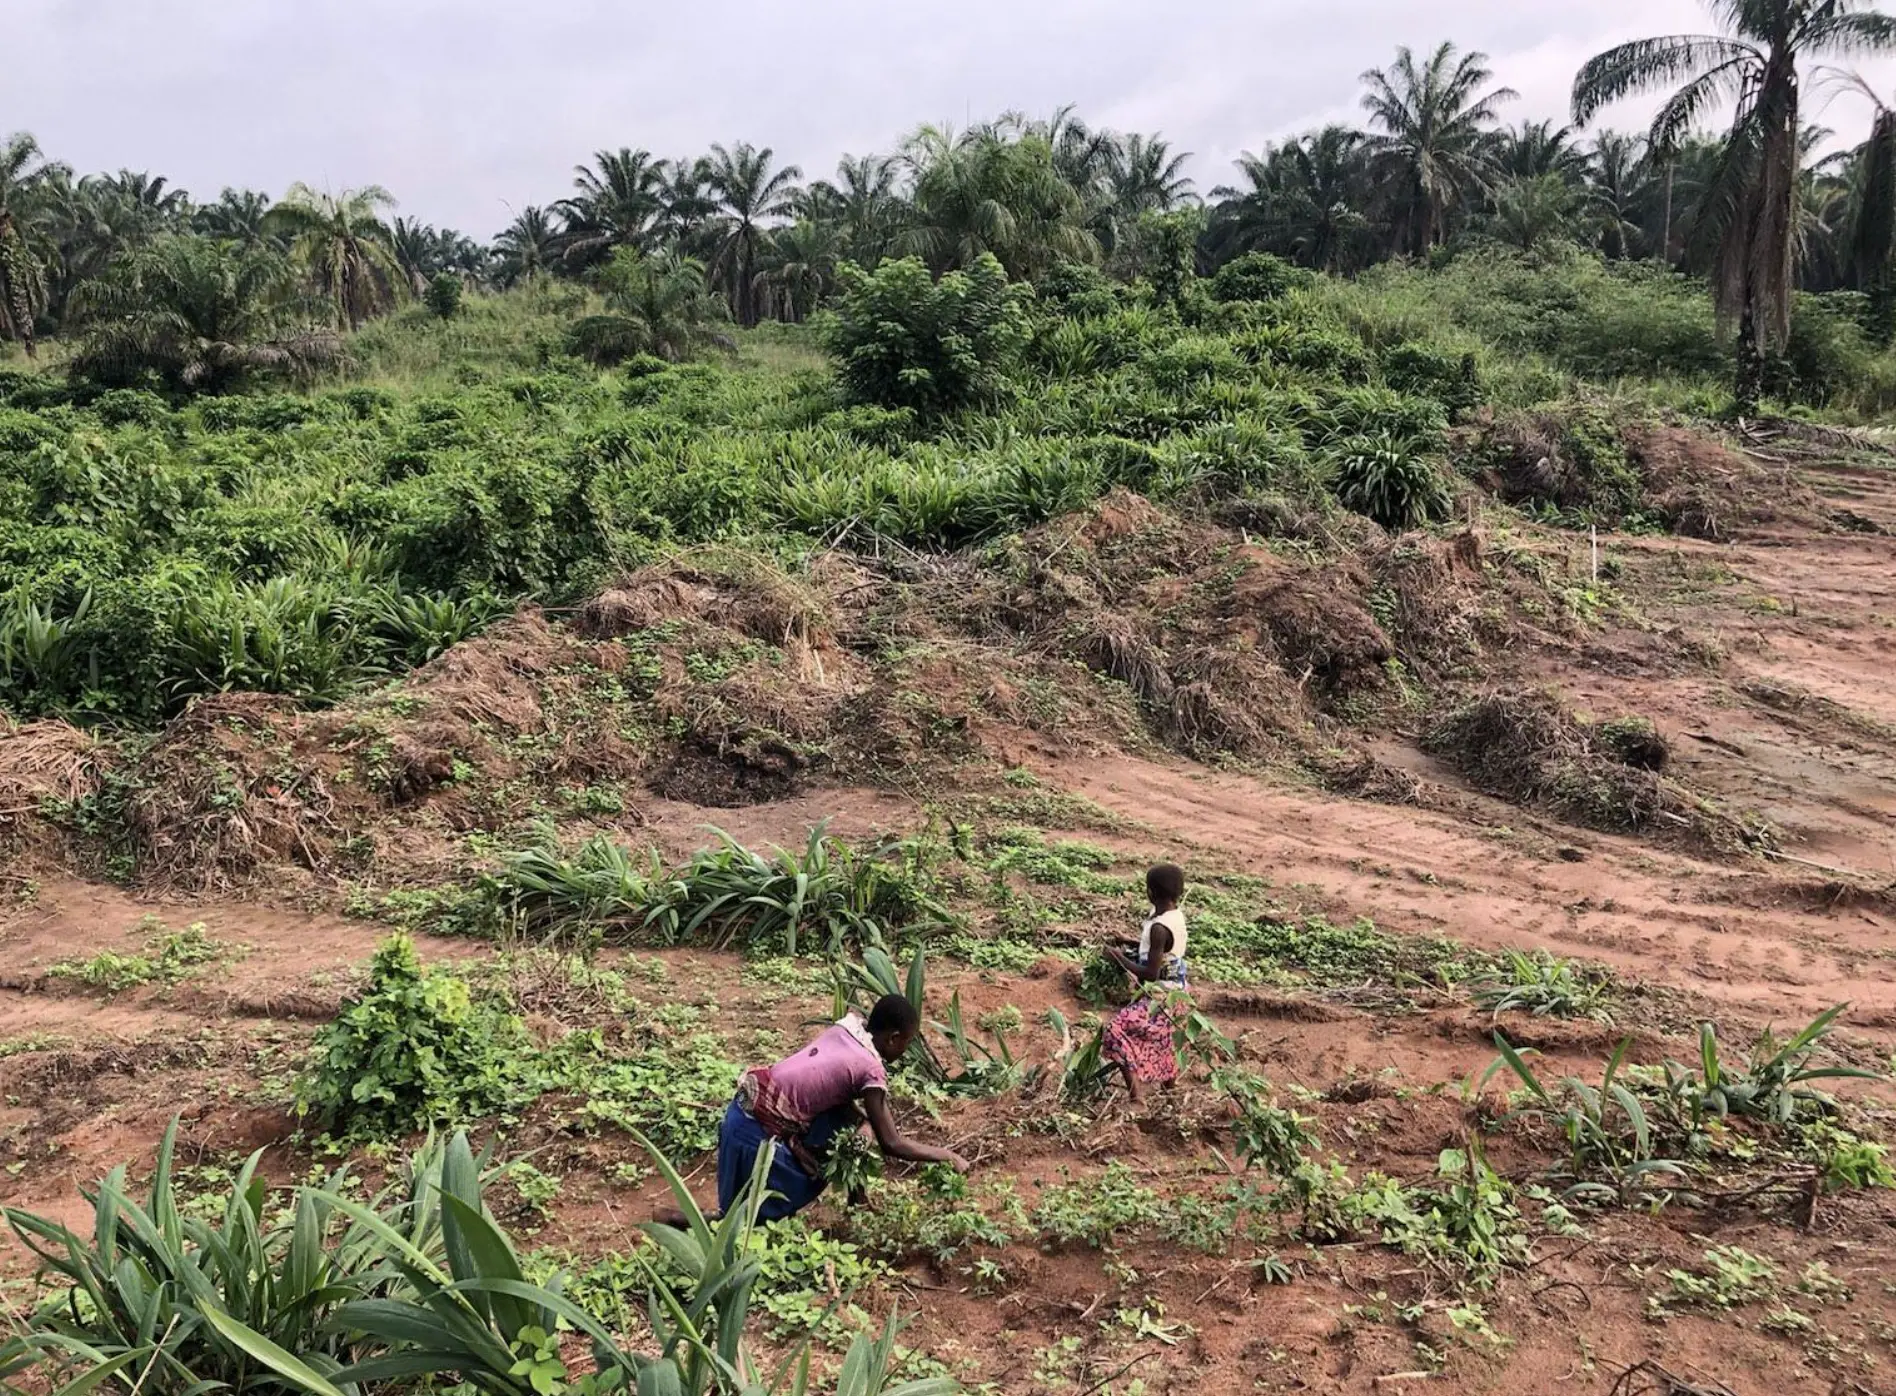 Two girls picking cassava leaves in a field torn with exposed red earth